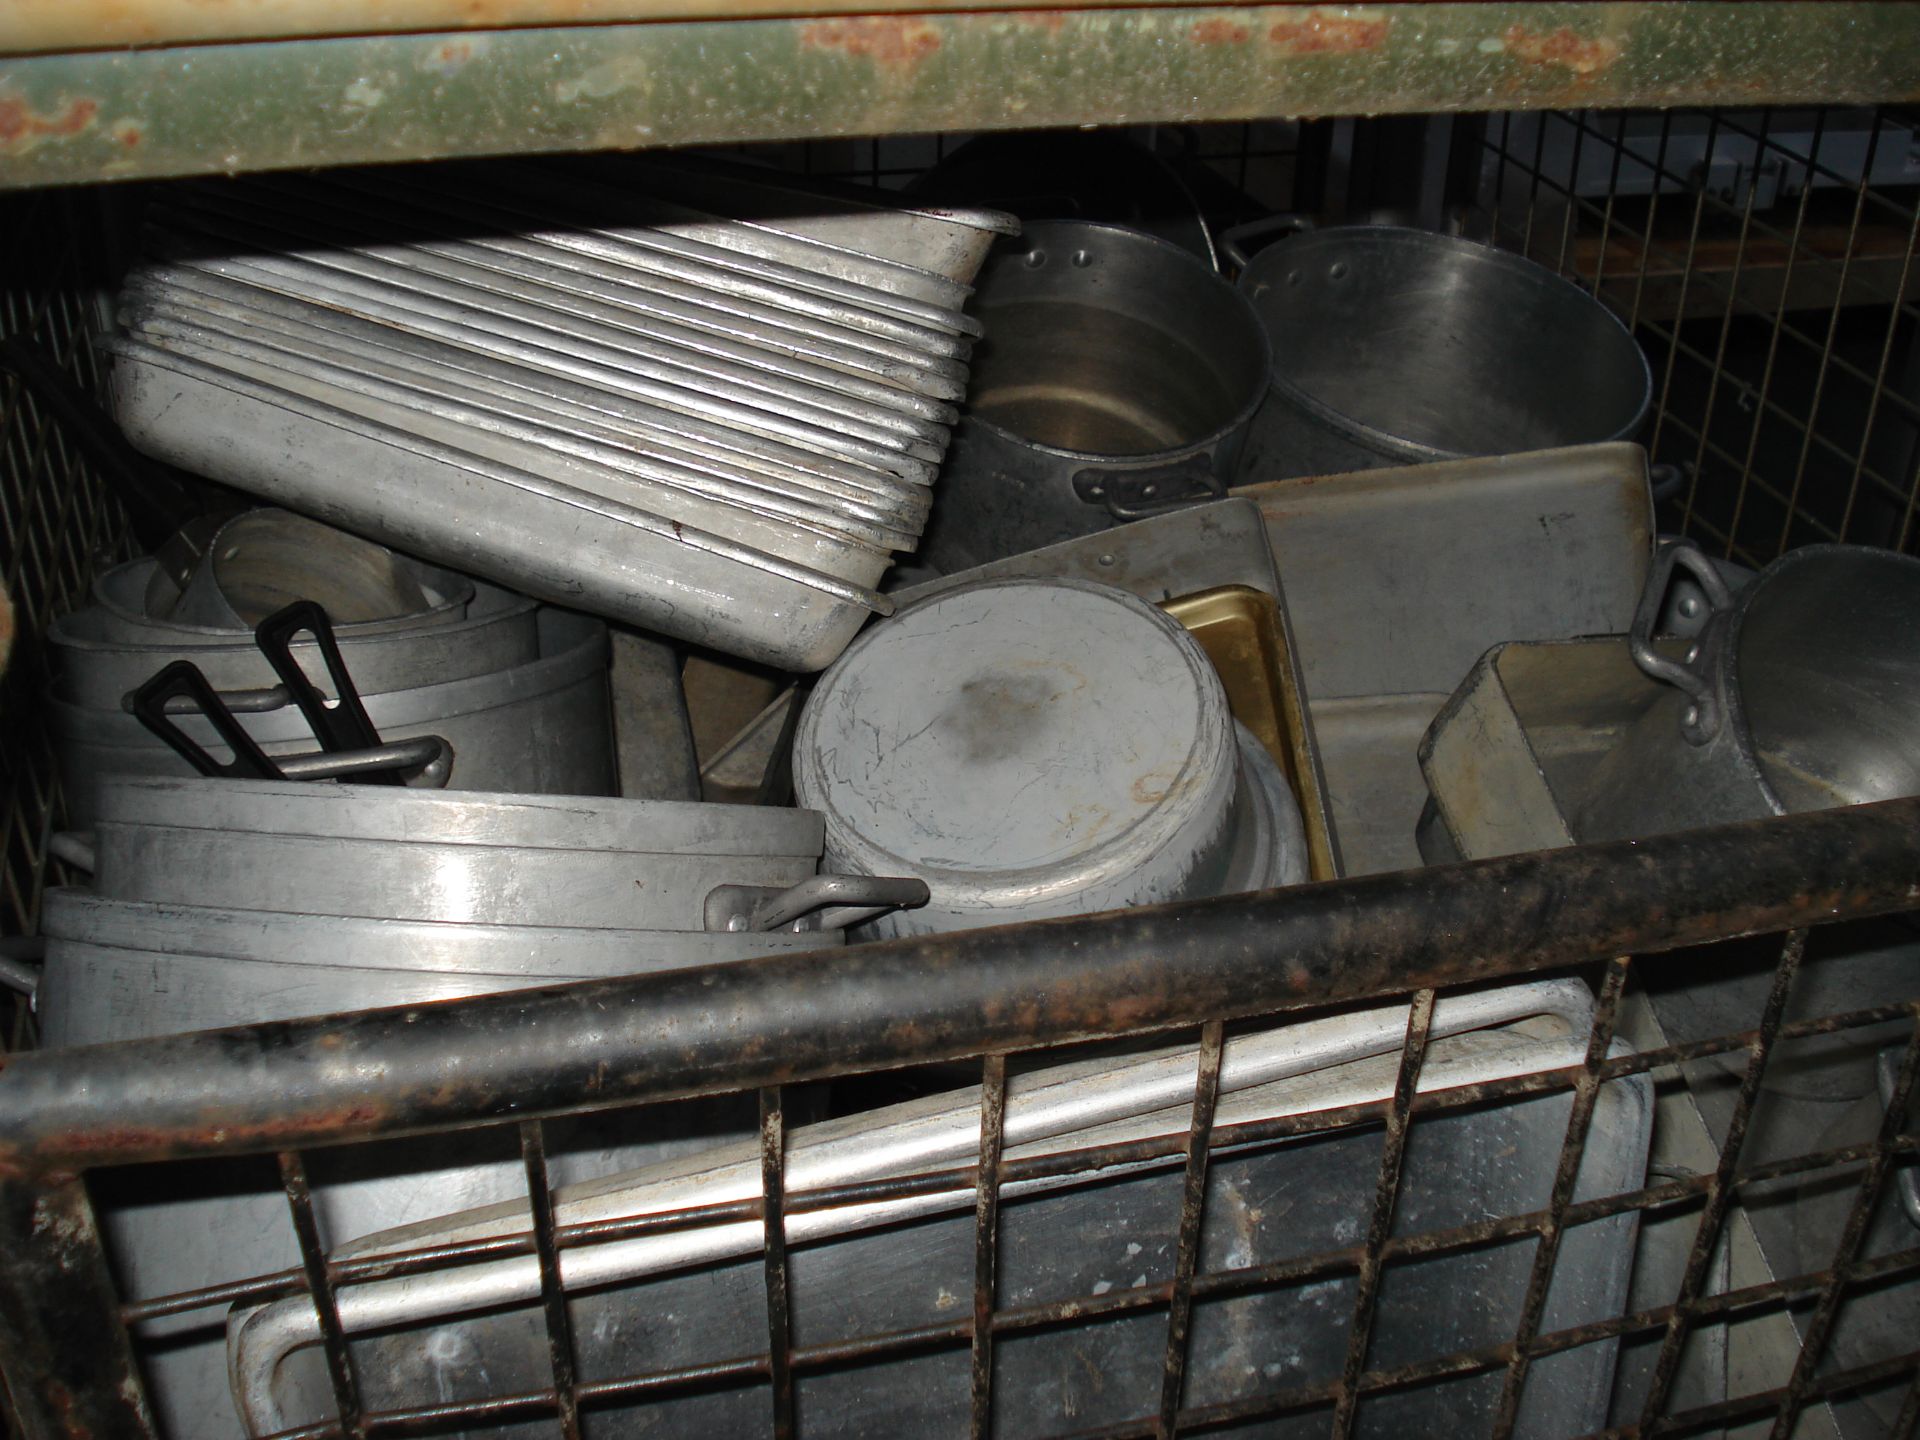 MIXED COMMERCIAL GRADE COOKING TRAYS AND SAUCEPANS - MIXED CONDITION - STORAGE MEDIA NOT INCLUDED - Image 2 of 3